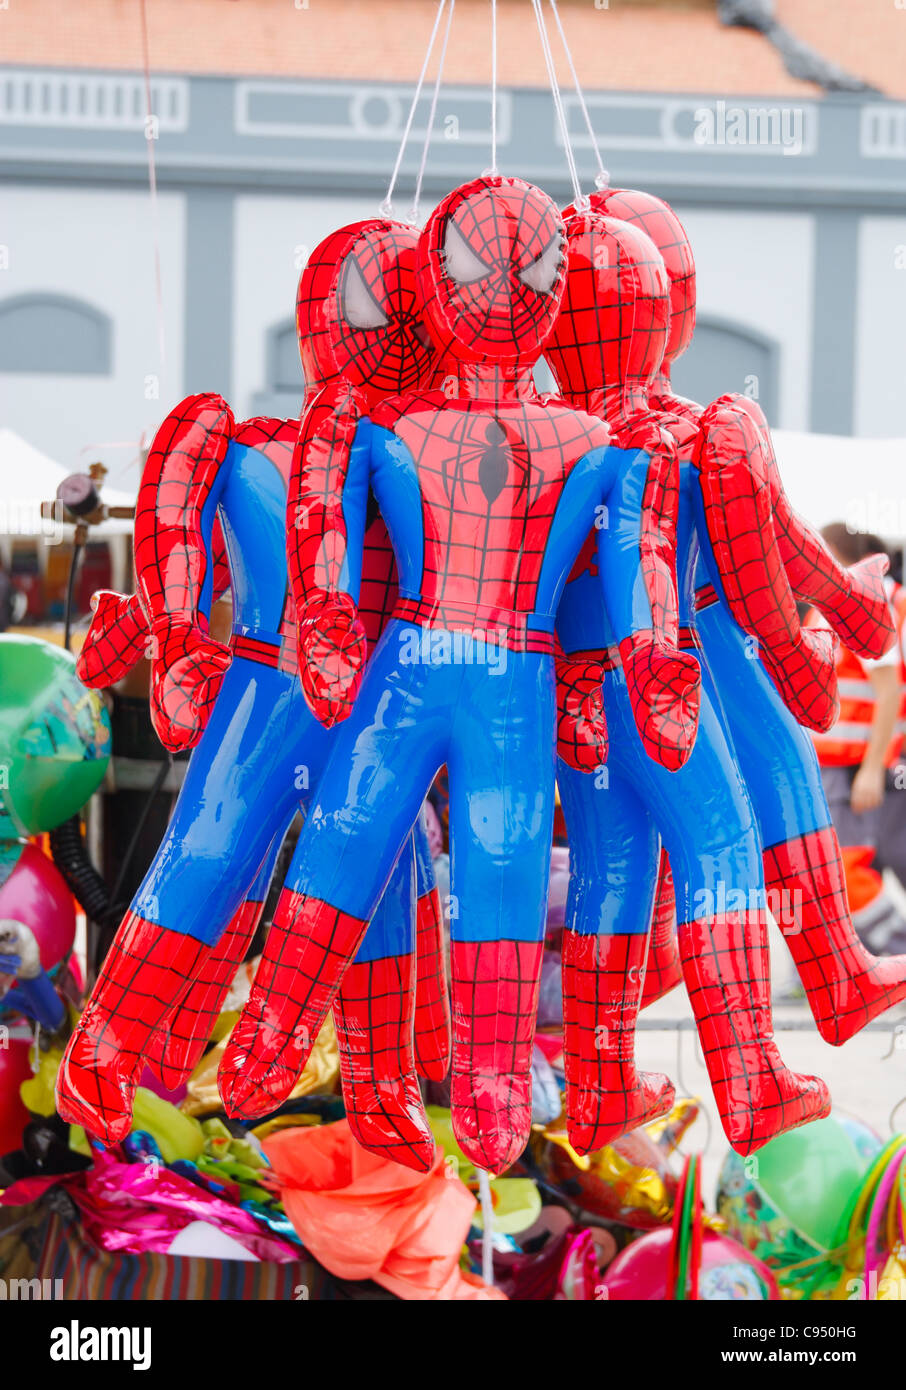 Inflatable Spiderman dolls on market stall in Spain Stock Photo